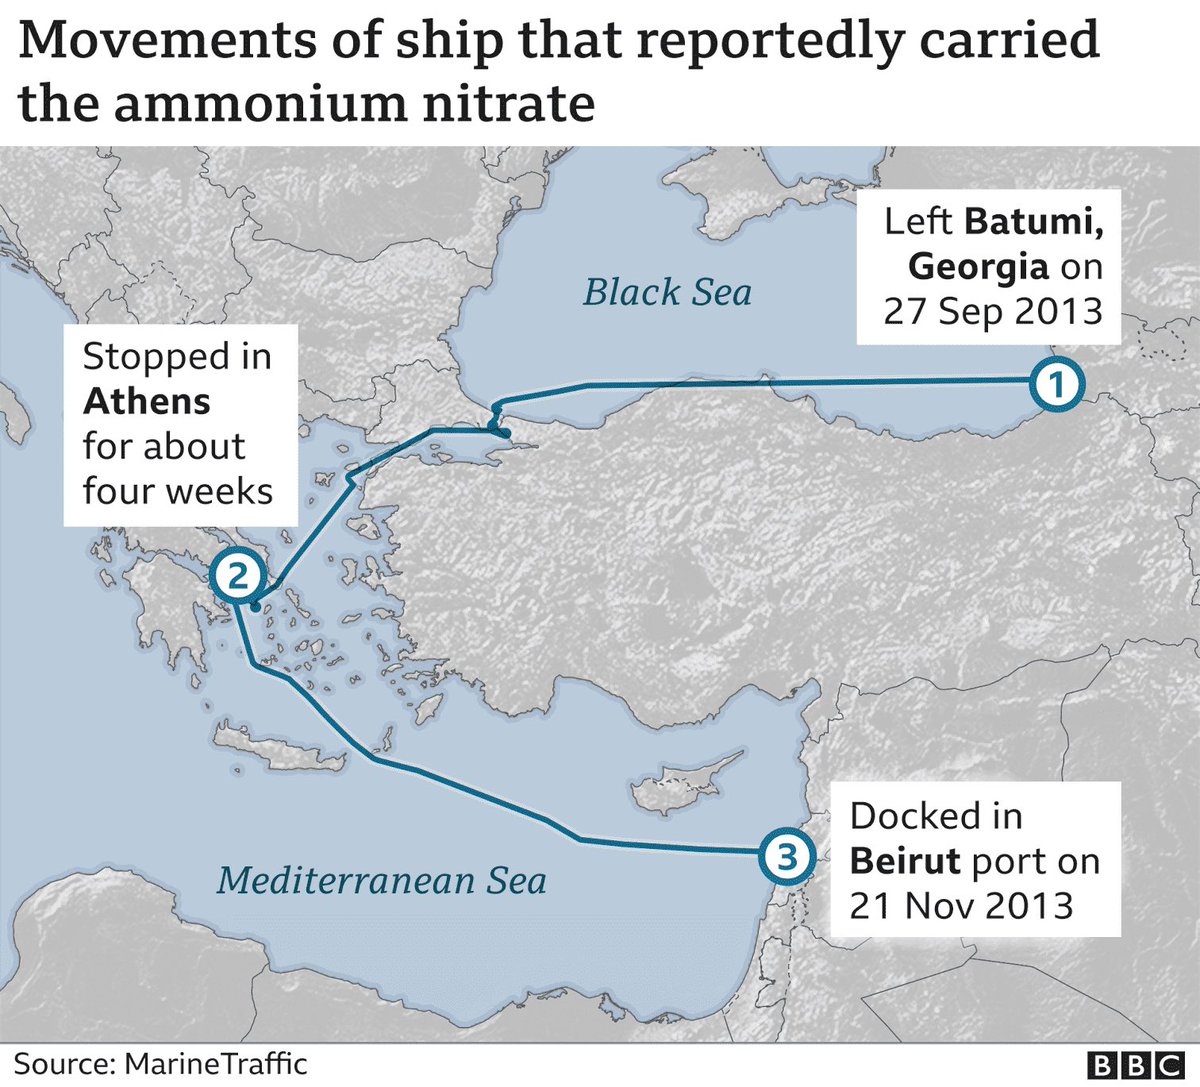 1/ Supposedly Rhosus was carrying 2750 Tons of Ammonium Nitrate to Moz and diverted to Lebanon due to technical failure. But it’s movement during July-August 2013 indicate its was waiting 1 month in Greece and made its move from Greece intentionally heading to Beirut  https://twitter.com/dimasadek/status/1291486030458224640